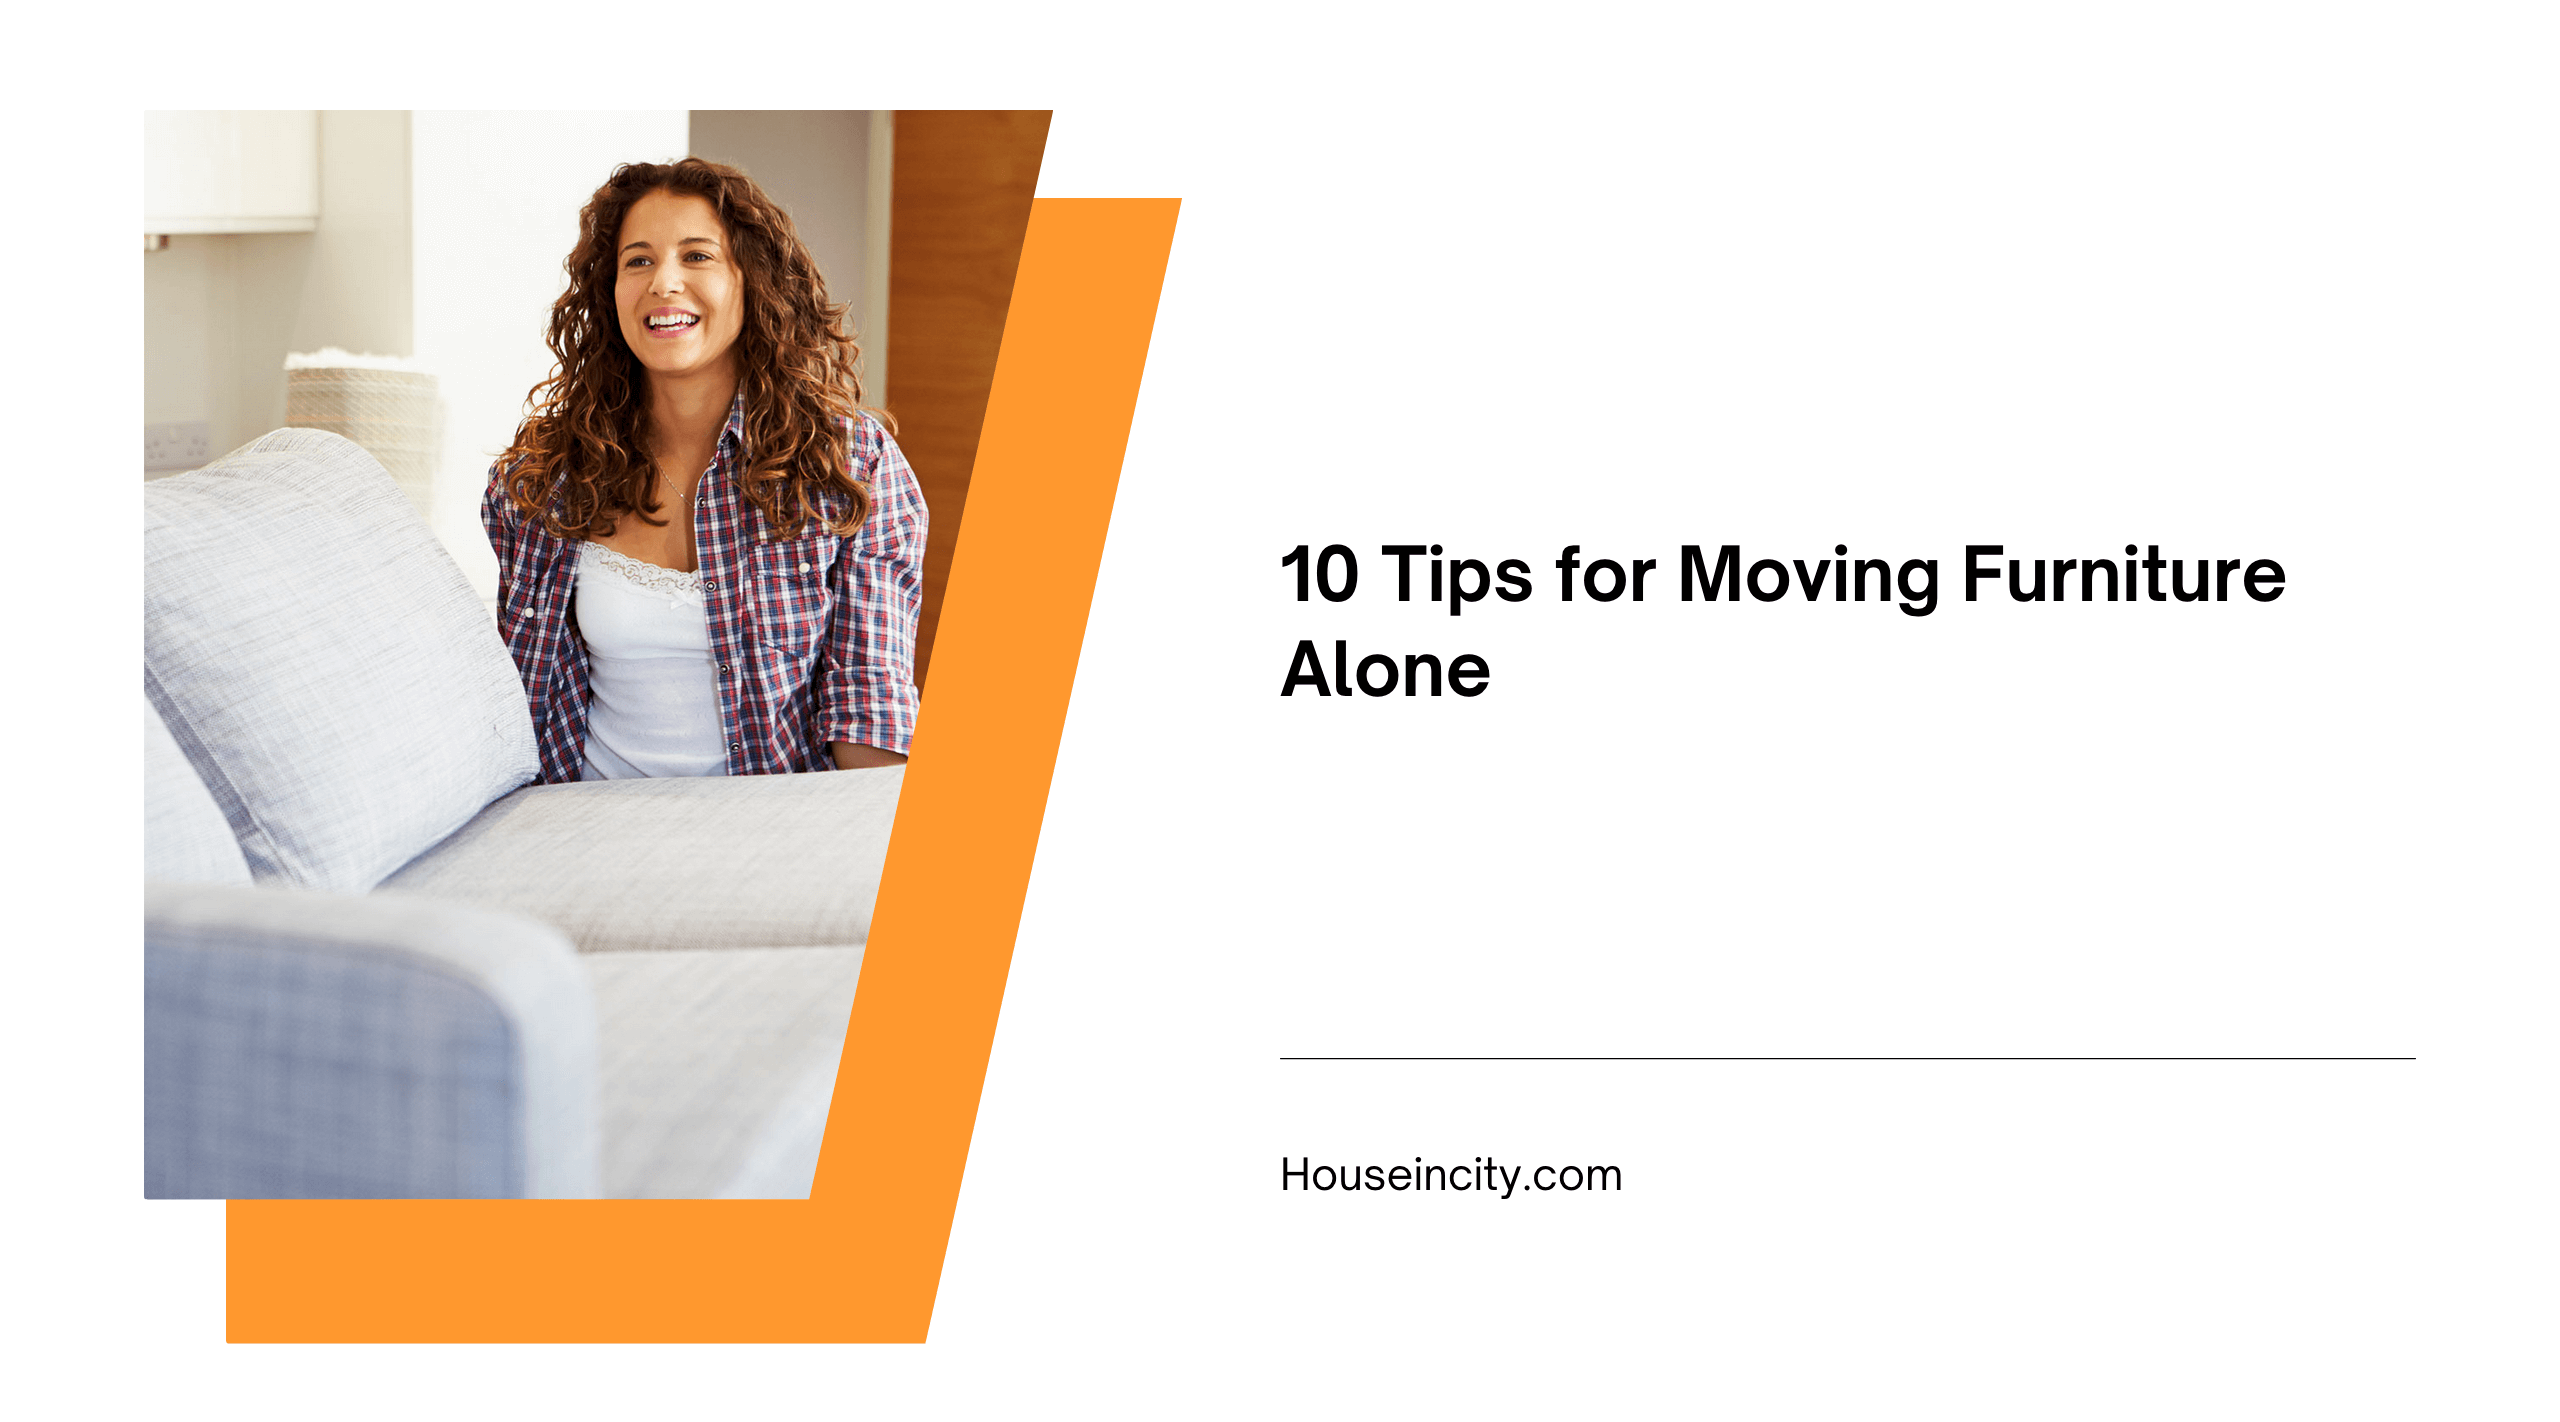 10 Tips for Moving Furniture Alone